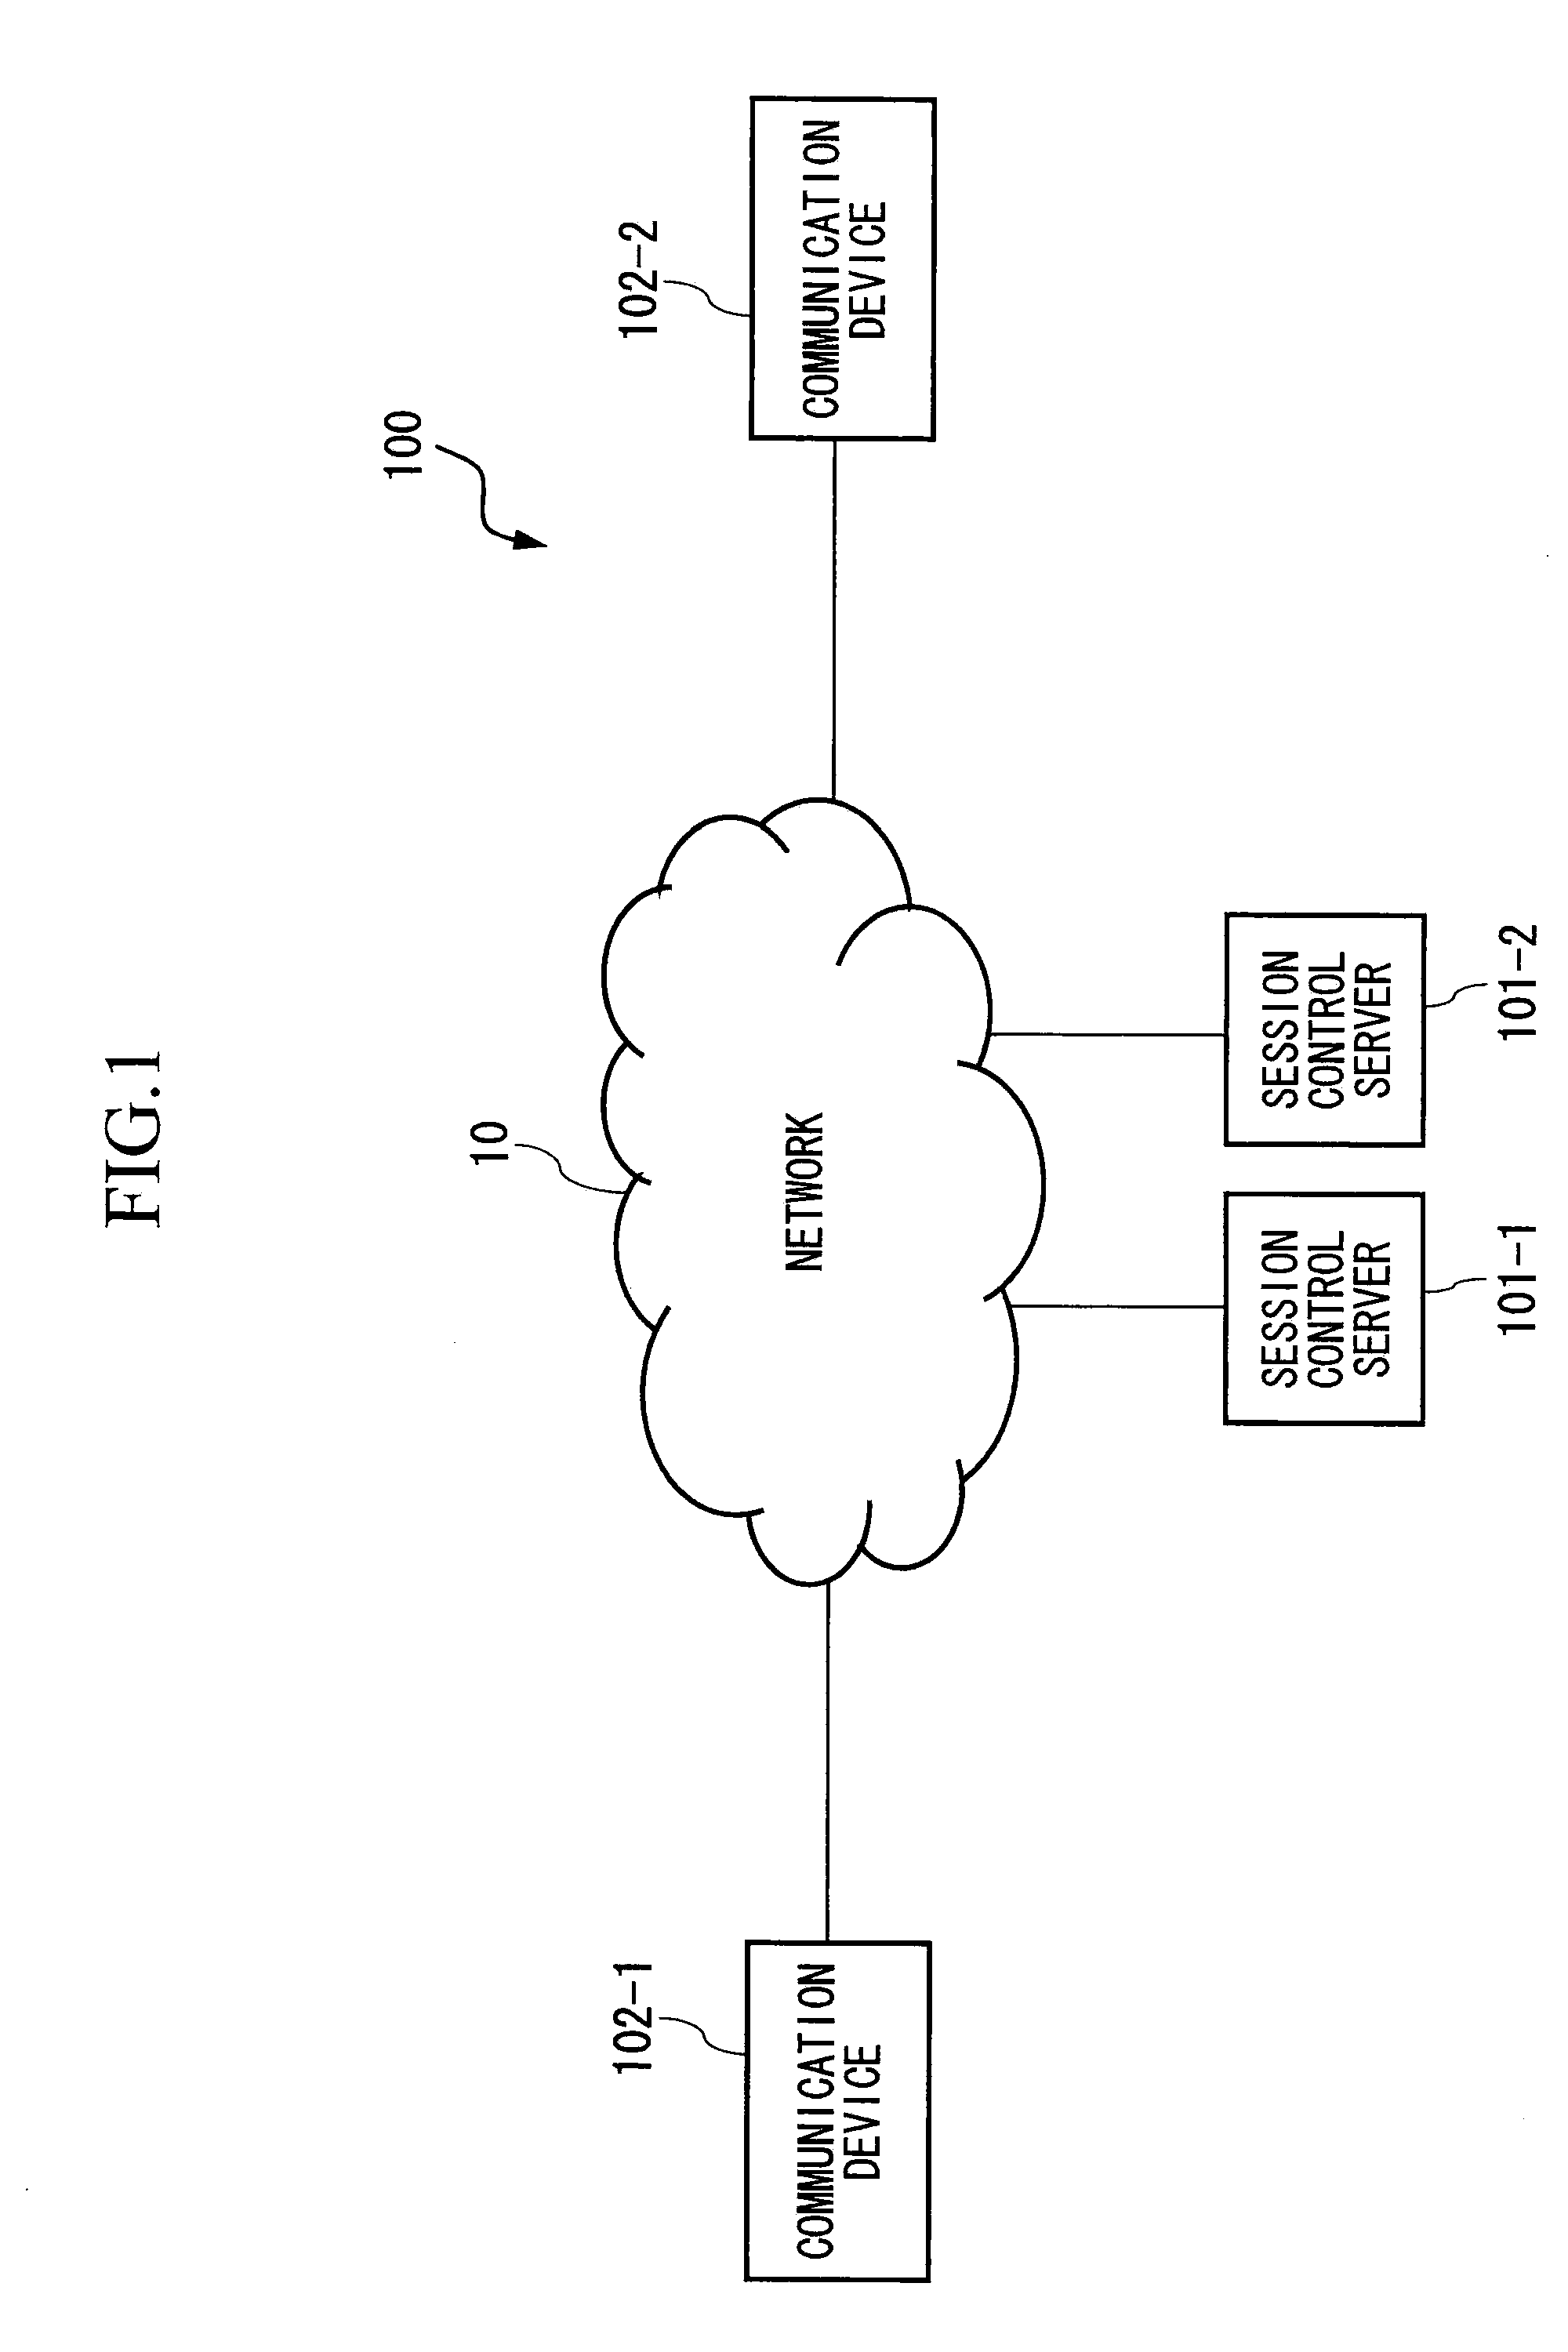 Session control server, communication device, communication system and communication method, and program and recording medium for the same